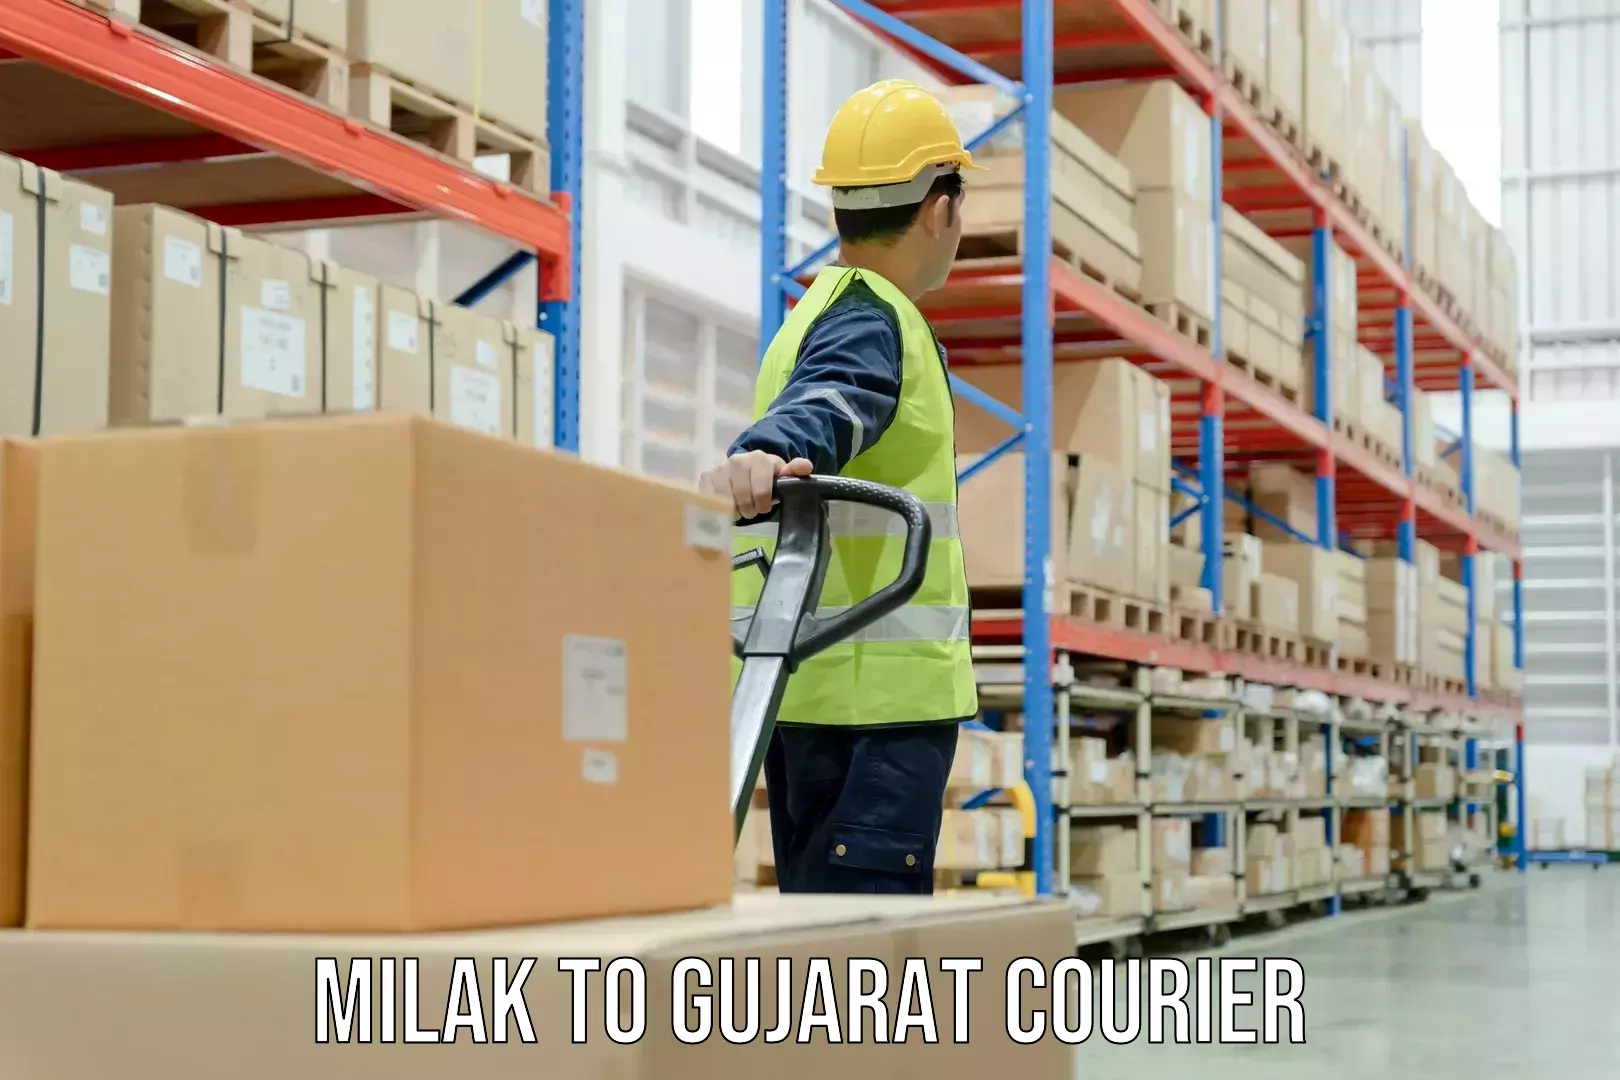 Courier rate comparison in Milak to Patan Gujarat